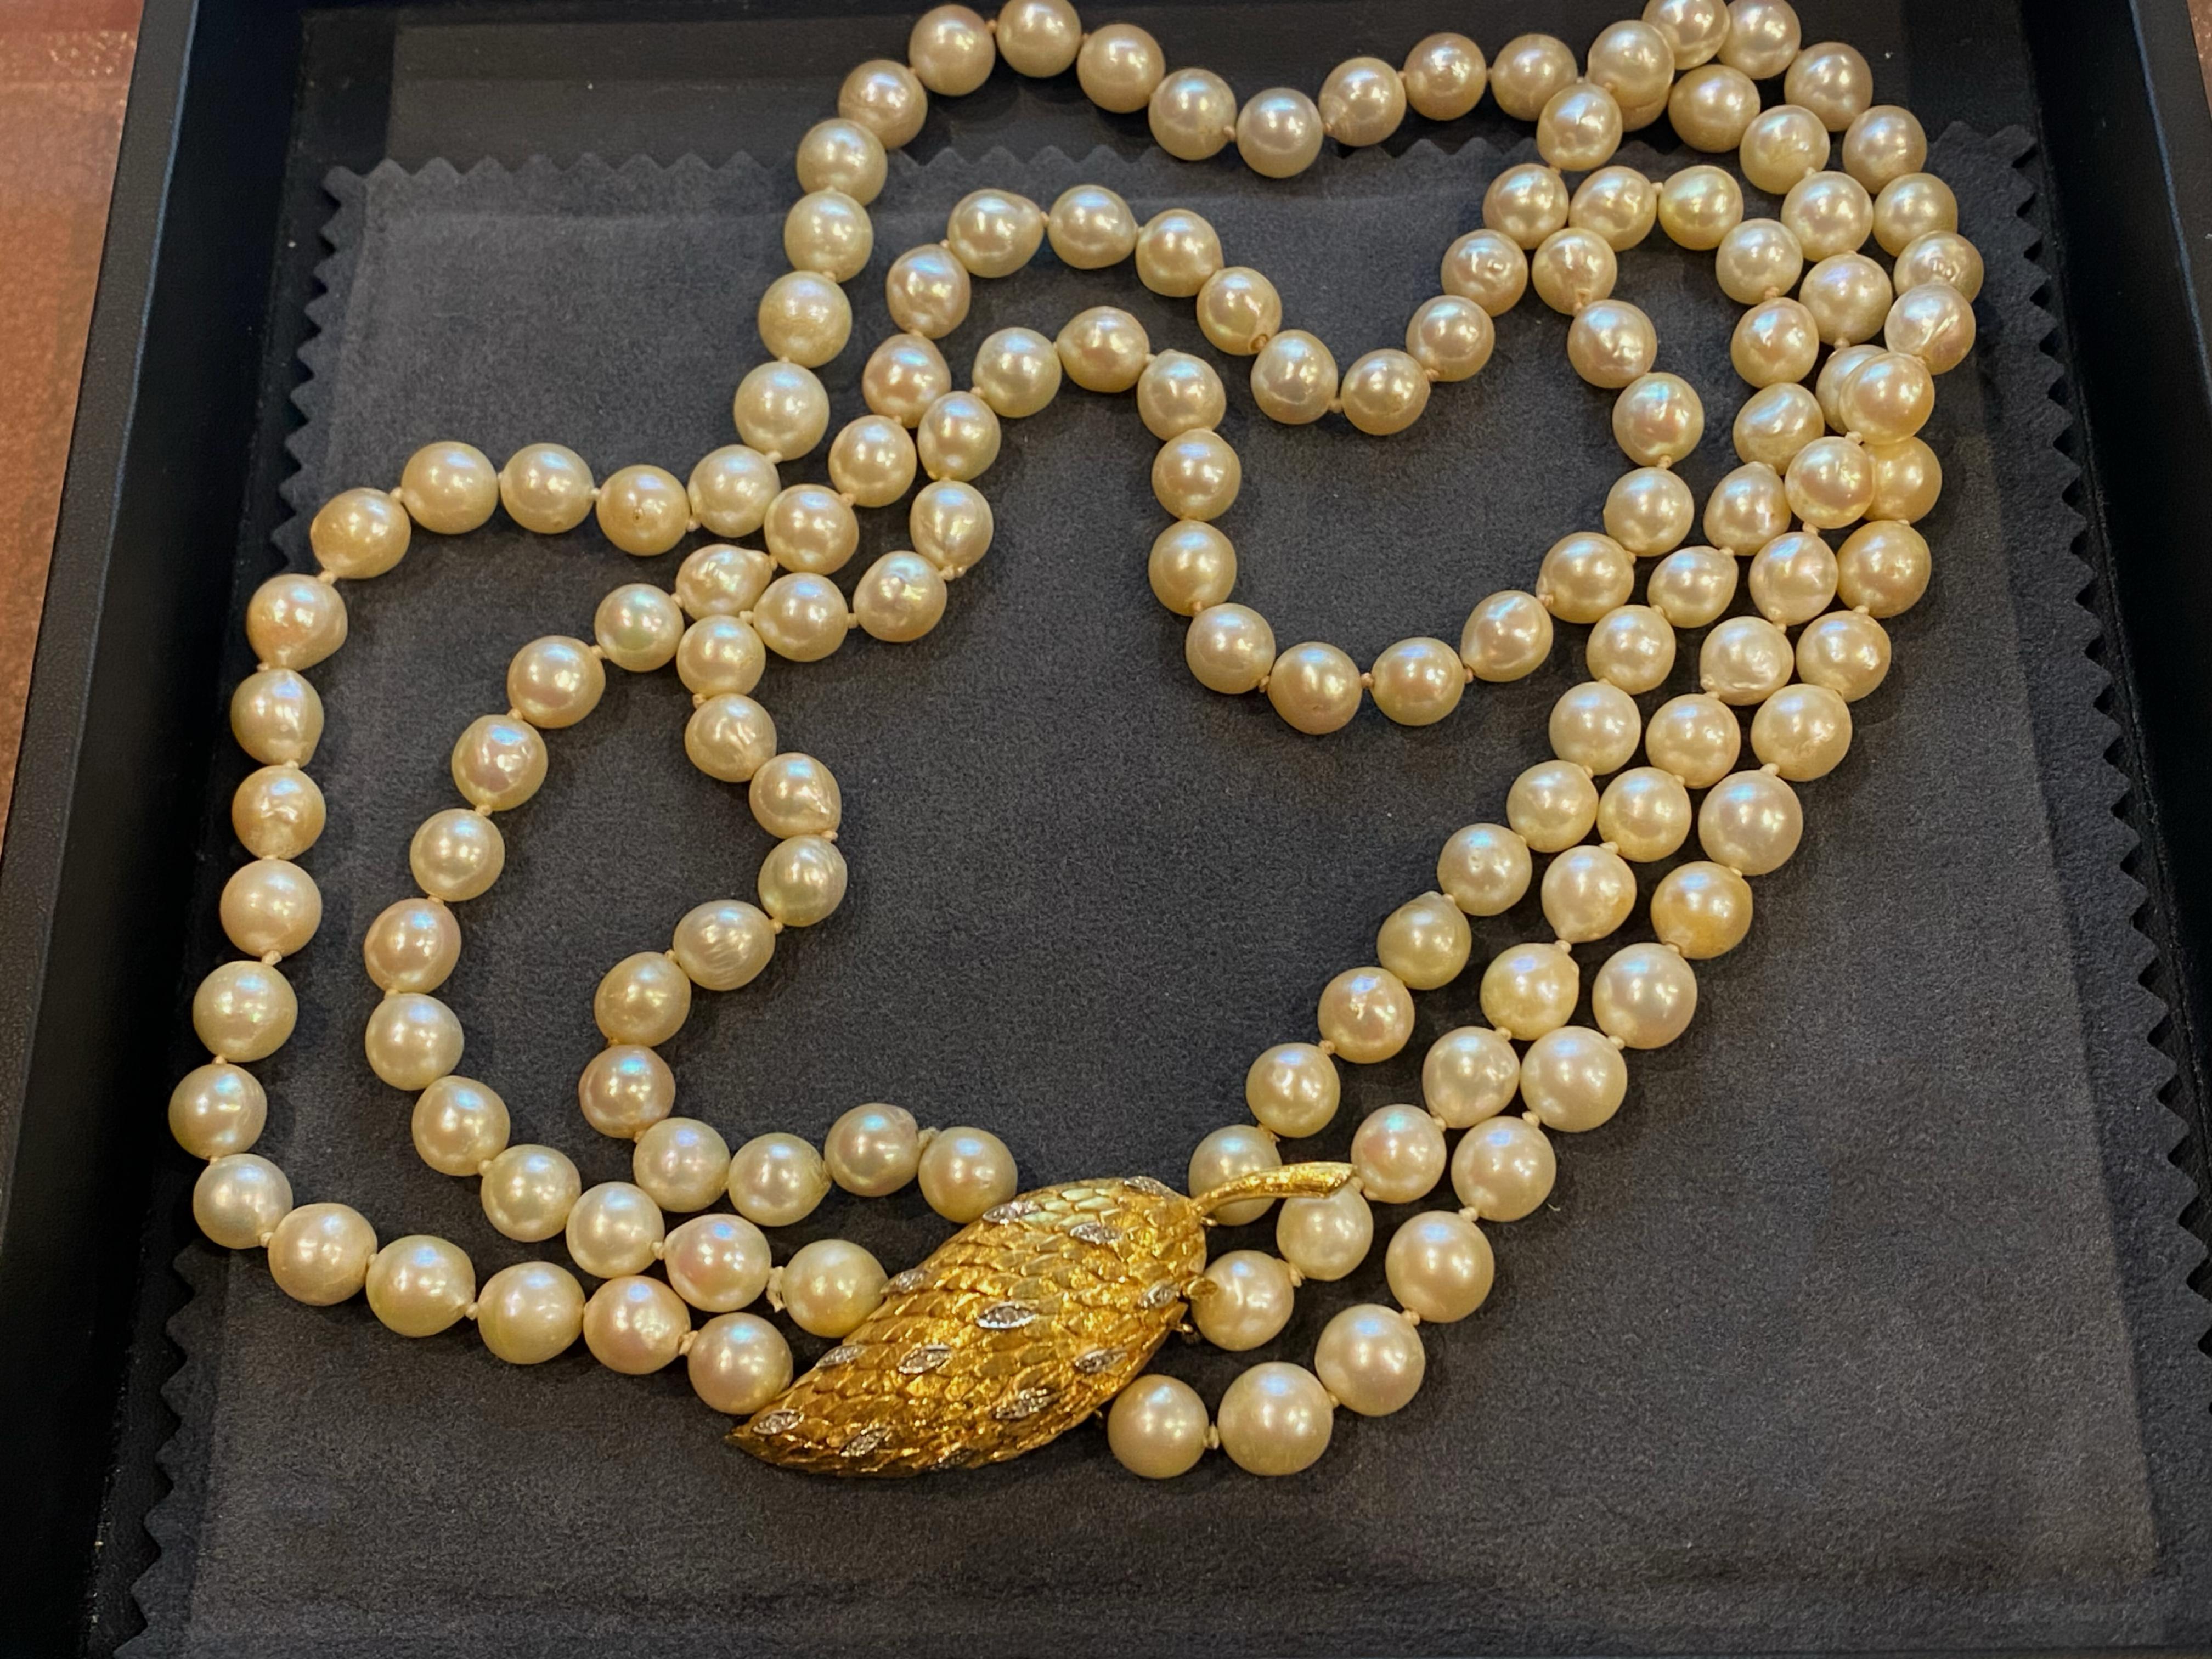 This Magnificent South Sea Pearl Necklace is 

of Queen Elizabeth’s Iconic Style – 

the Monarch was rarely seen in public without 

her favourite three-strand pearl necklace

 

This piece is comprising 

139 large South Sea Pearls, 

graduating